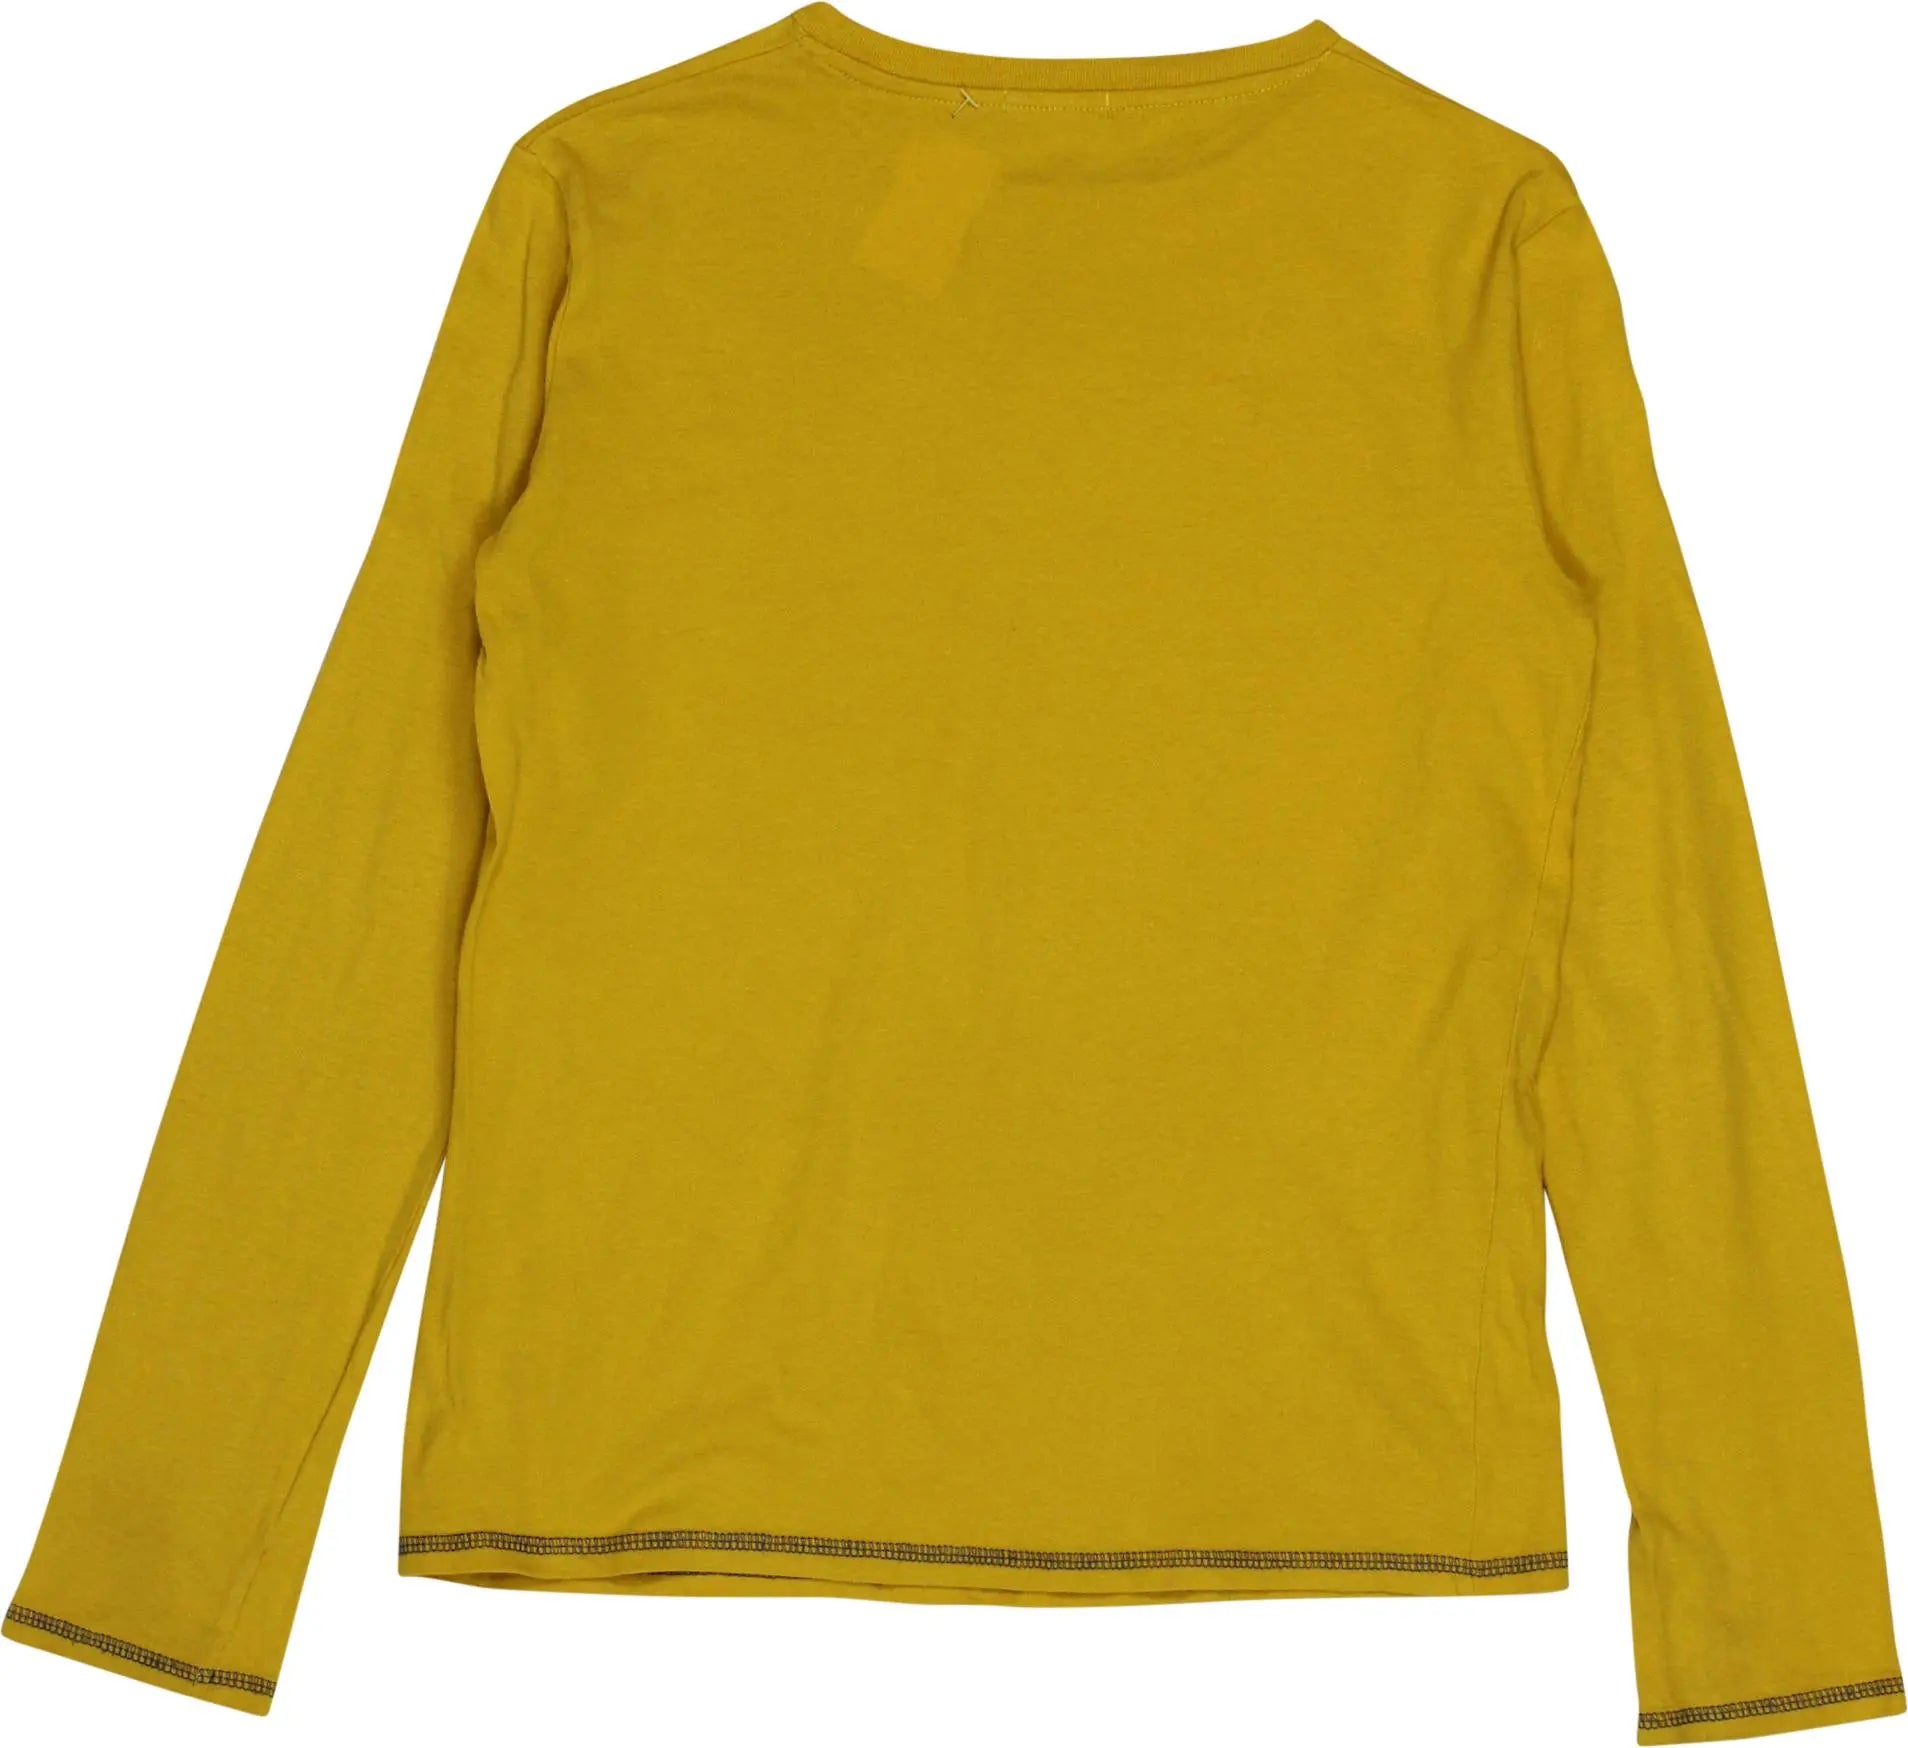 HEMA - Yellow long sleeve top- ThriftTale.com - Vintage and second handclothing